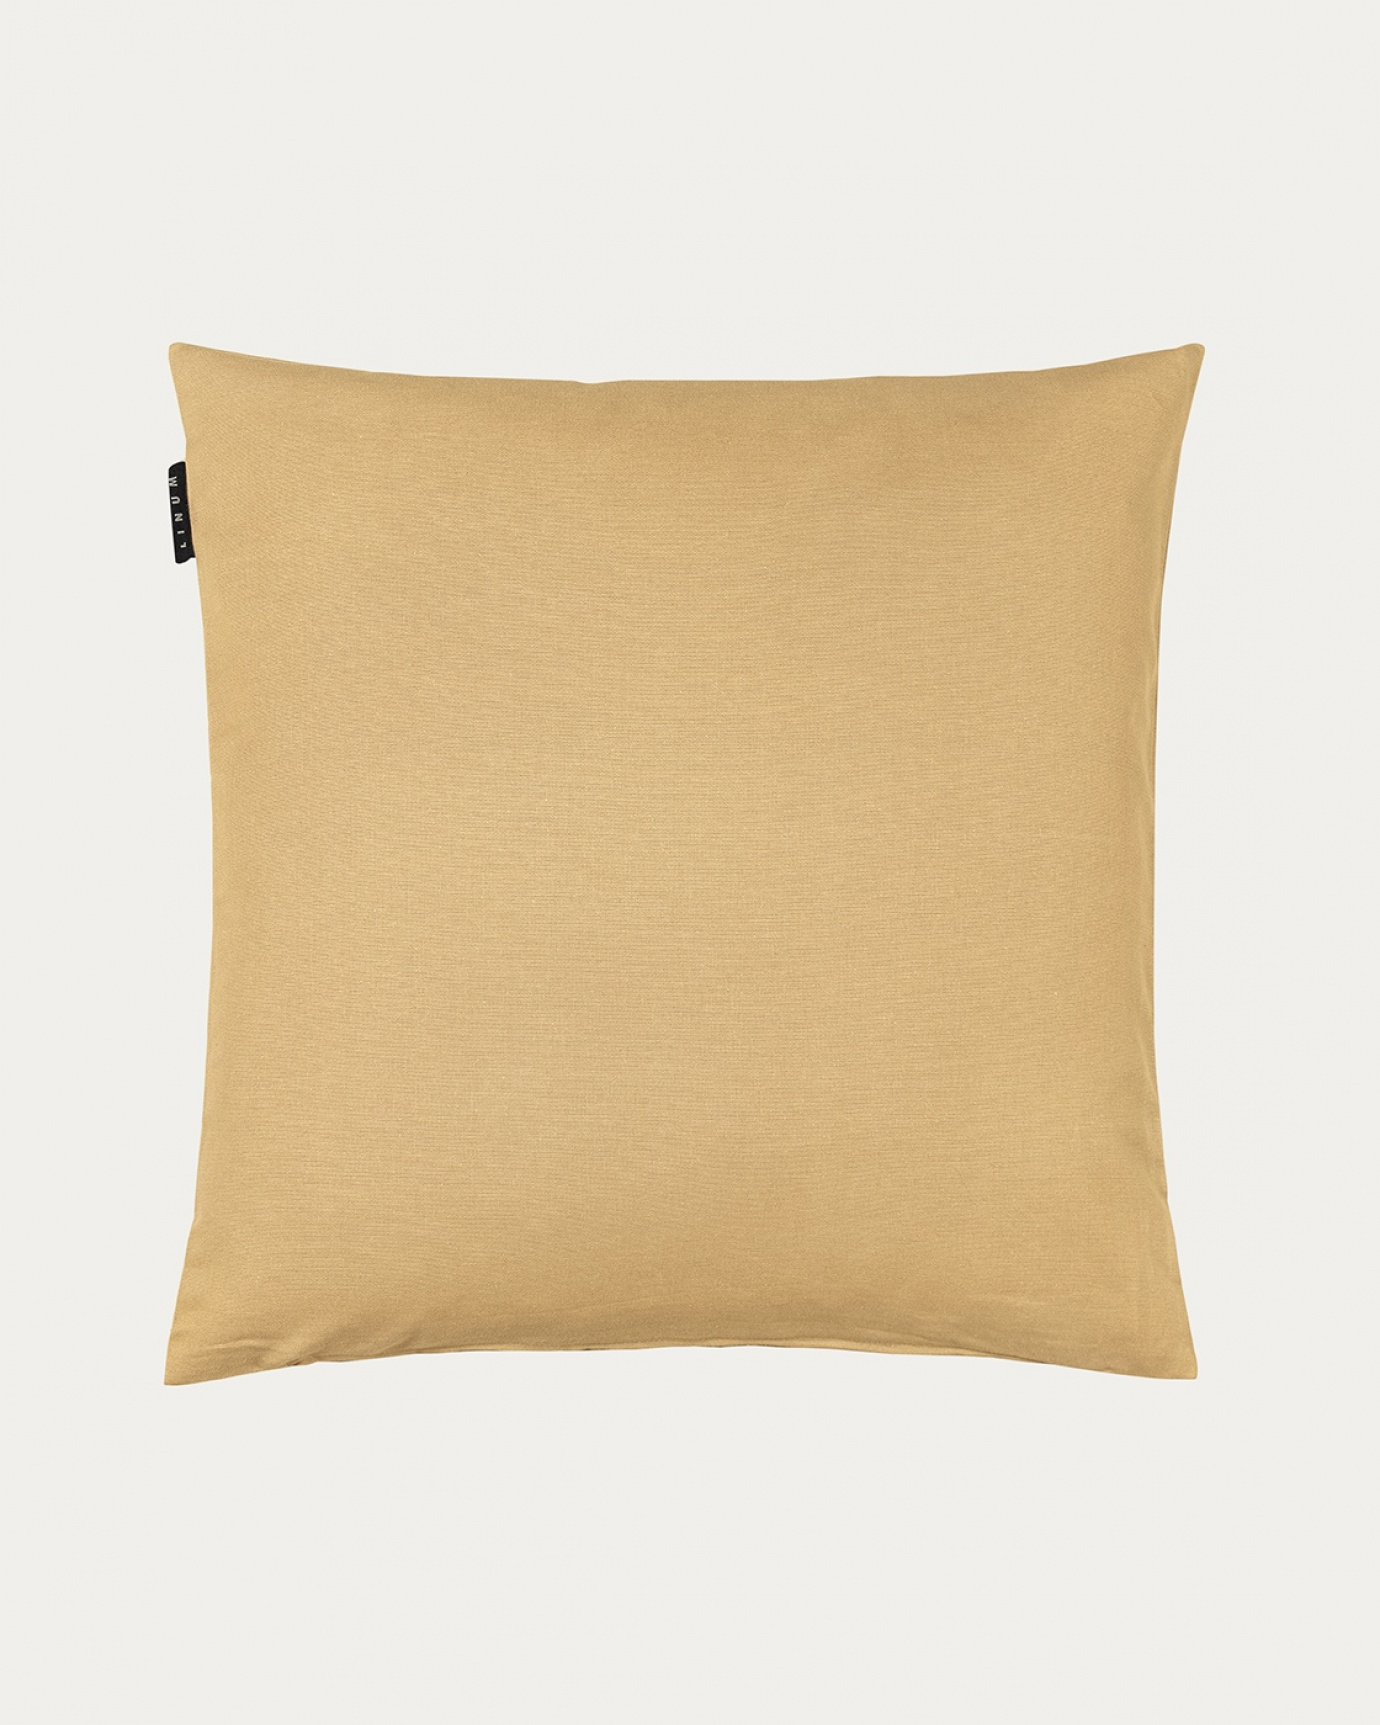 Product image straw yellow ANNABELL cushion cover made of soft cotton from LINUM DESIGN. Size 50x50 cm.